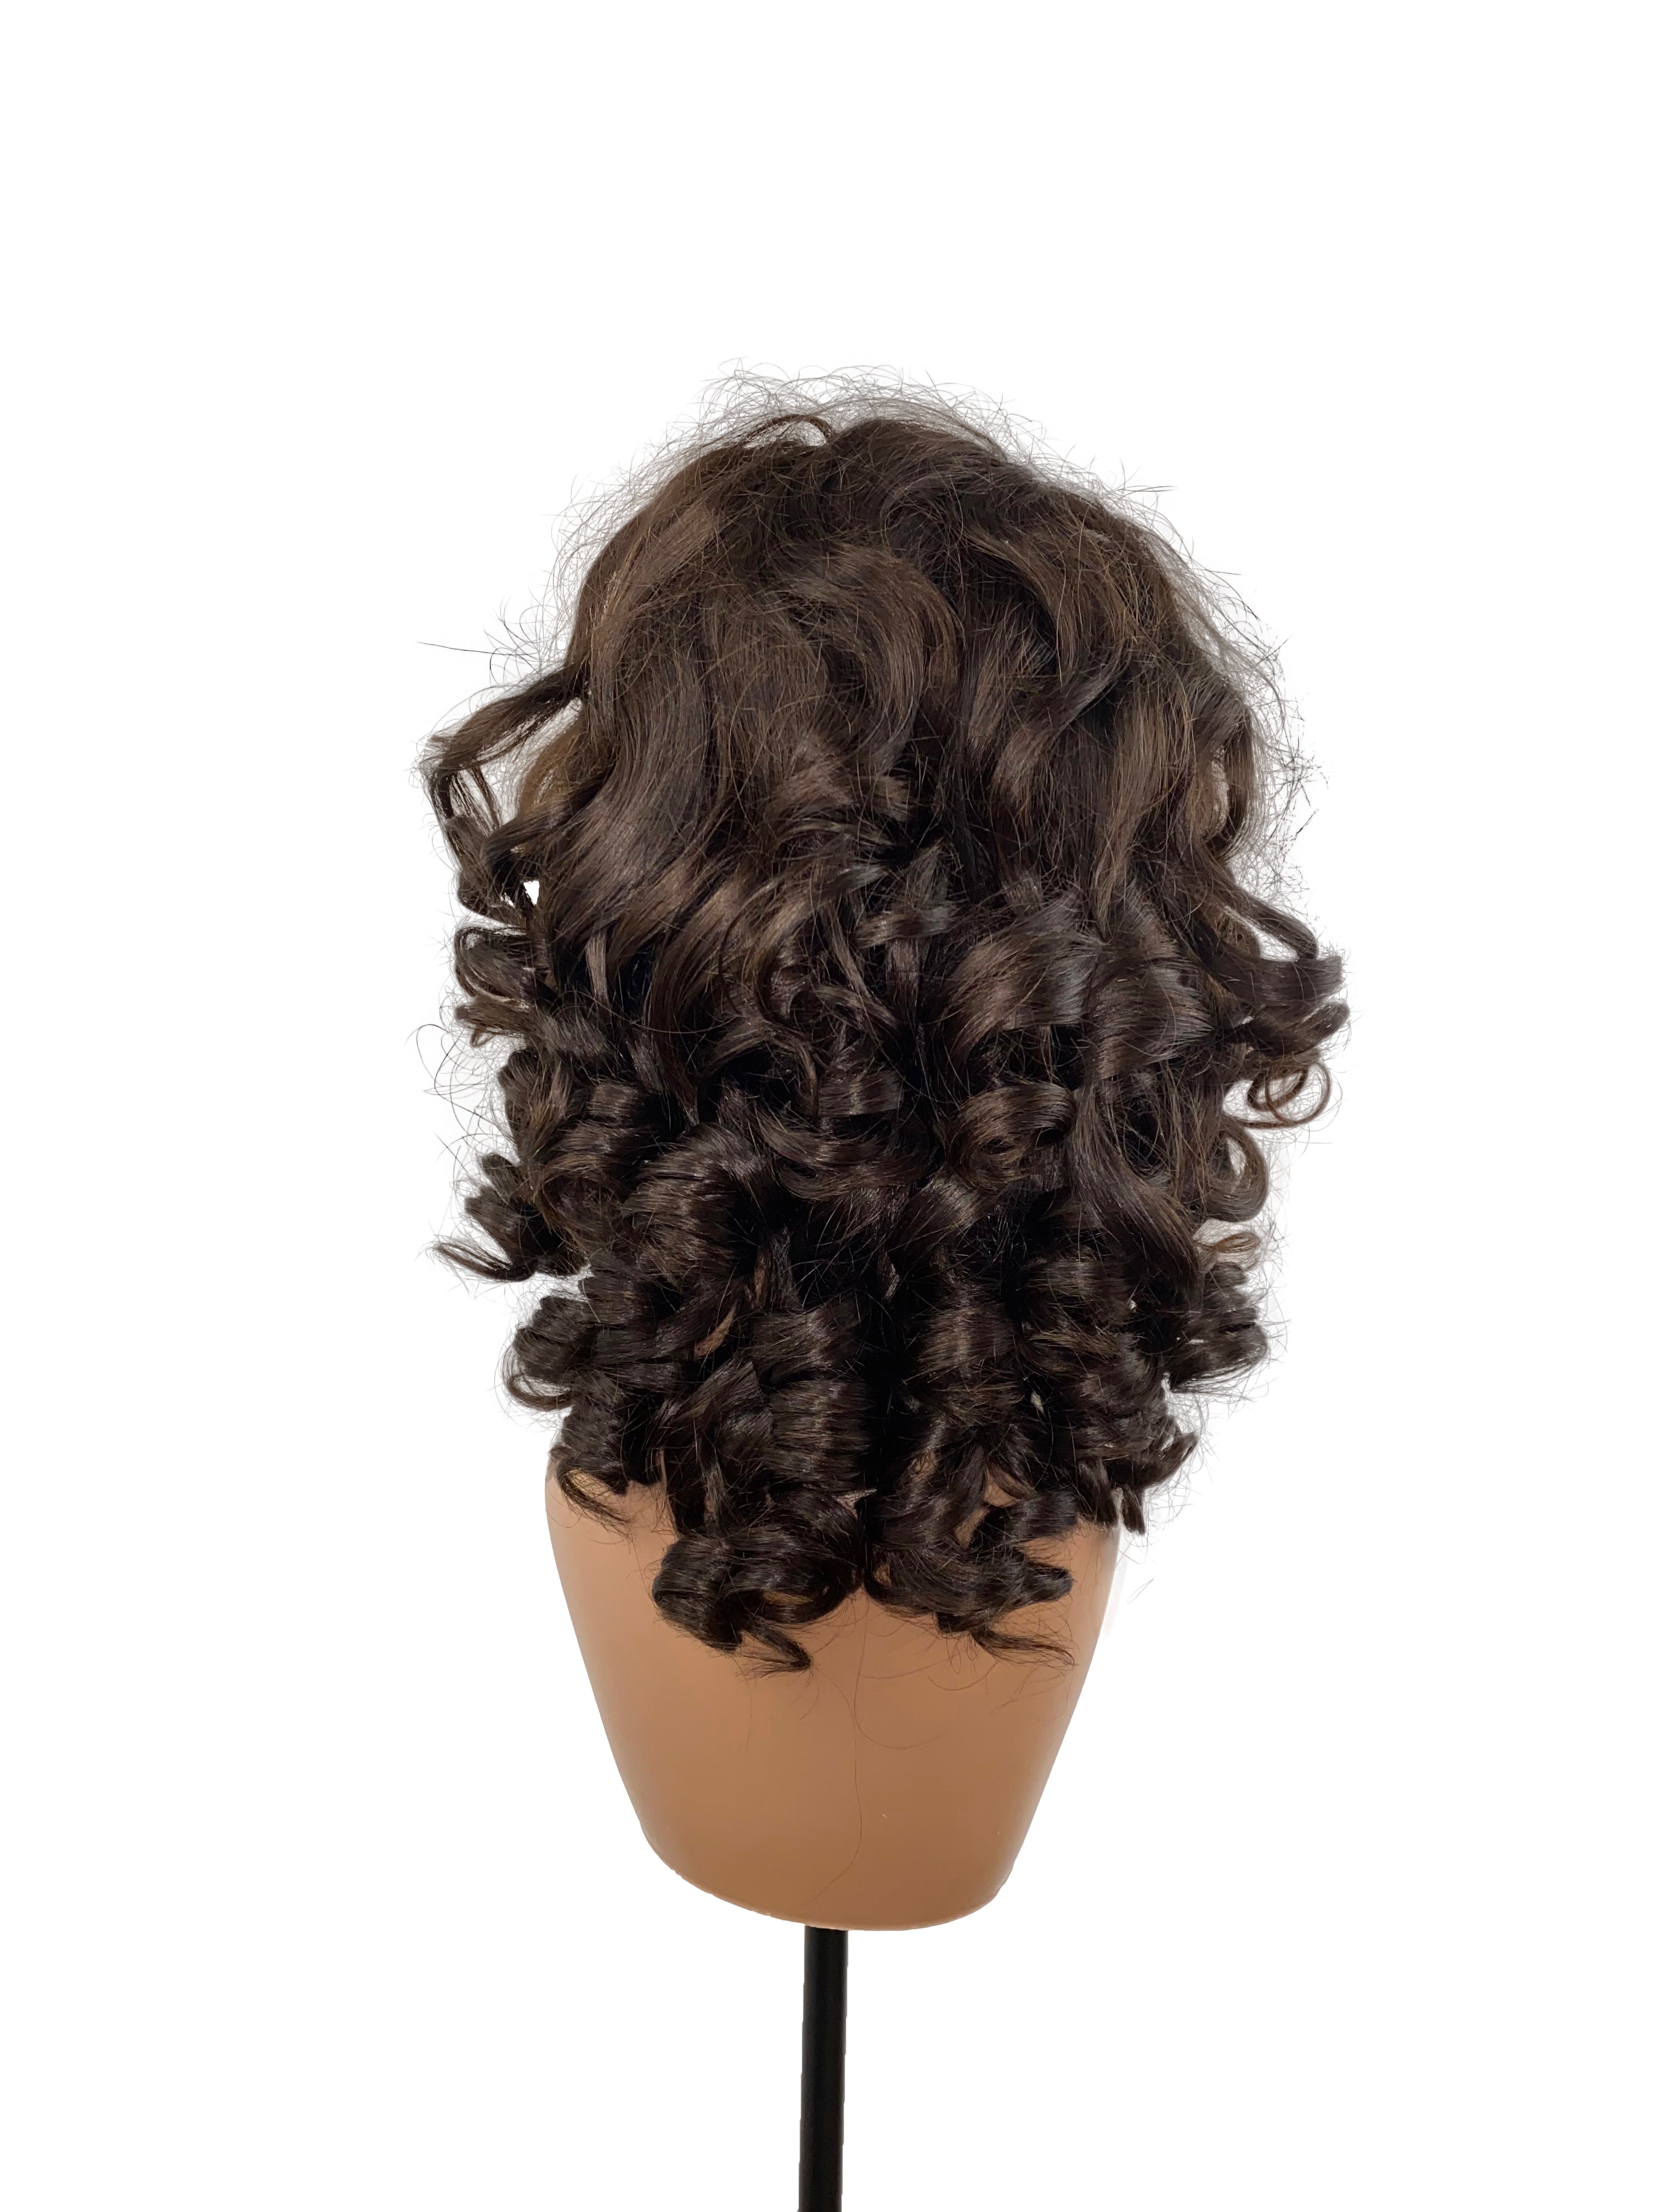 180% Density Fumi Customized 13x4 Transparent Lace Frontal Wig 220% Denisty 100% Human Hair Natural Color, #4, P4/27, Body Wave, Curl, Loose Curl